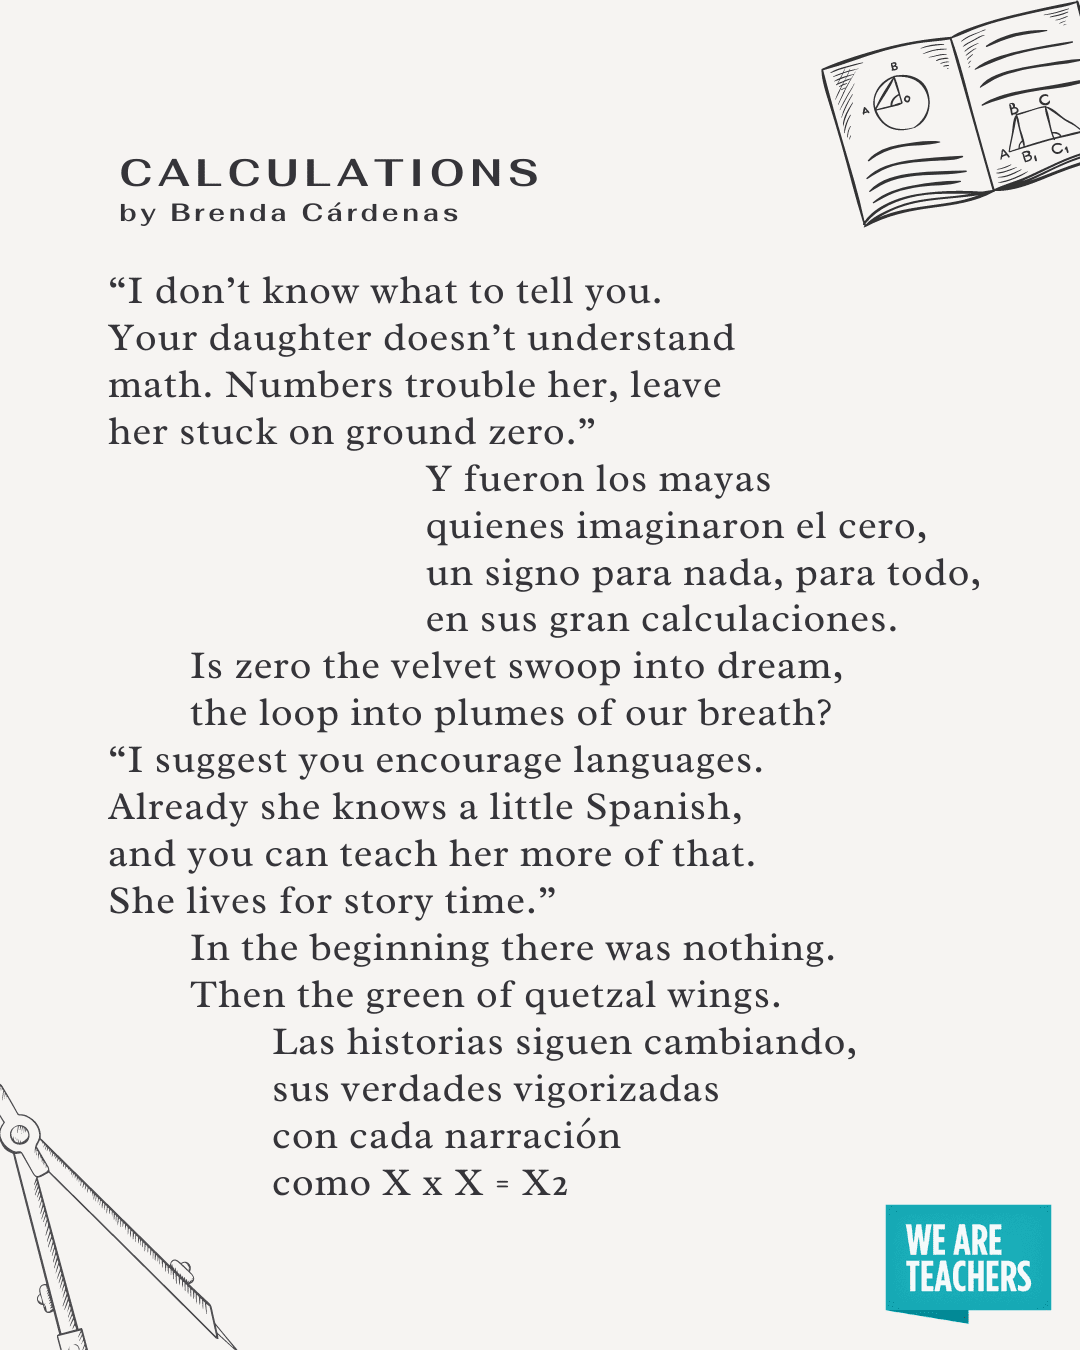 Calculations -- math poems for kids